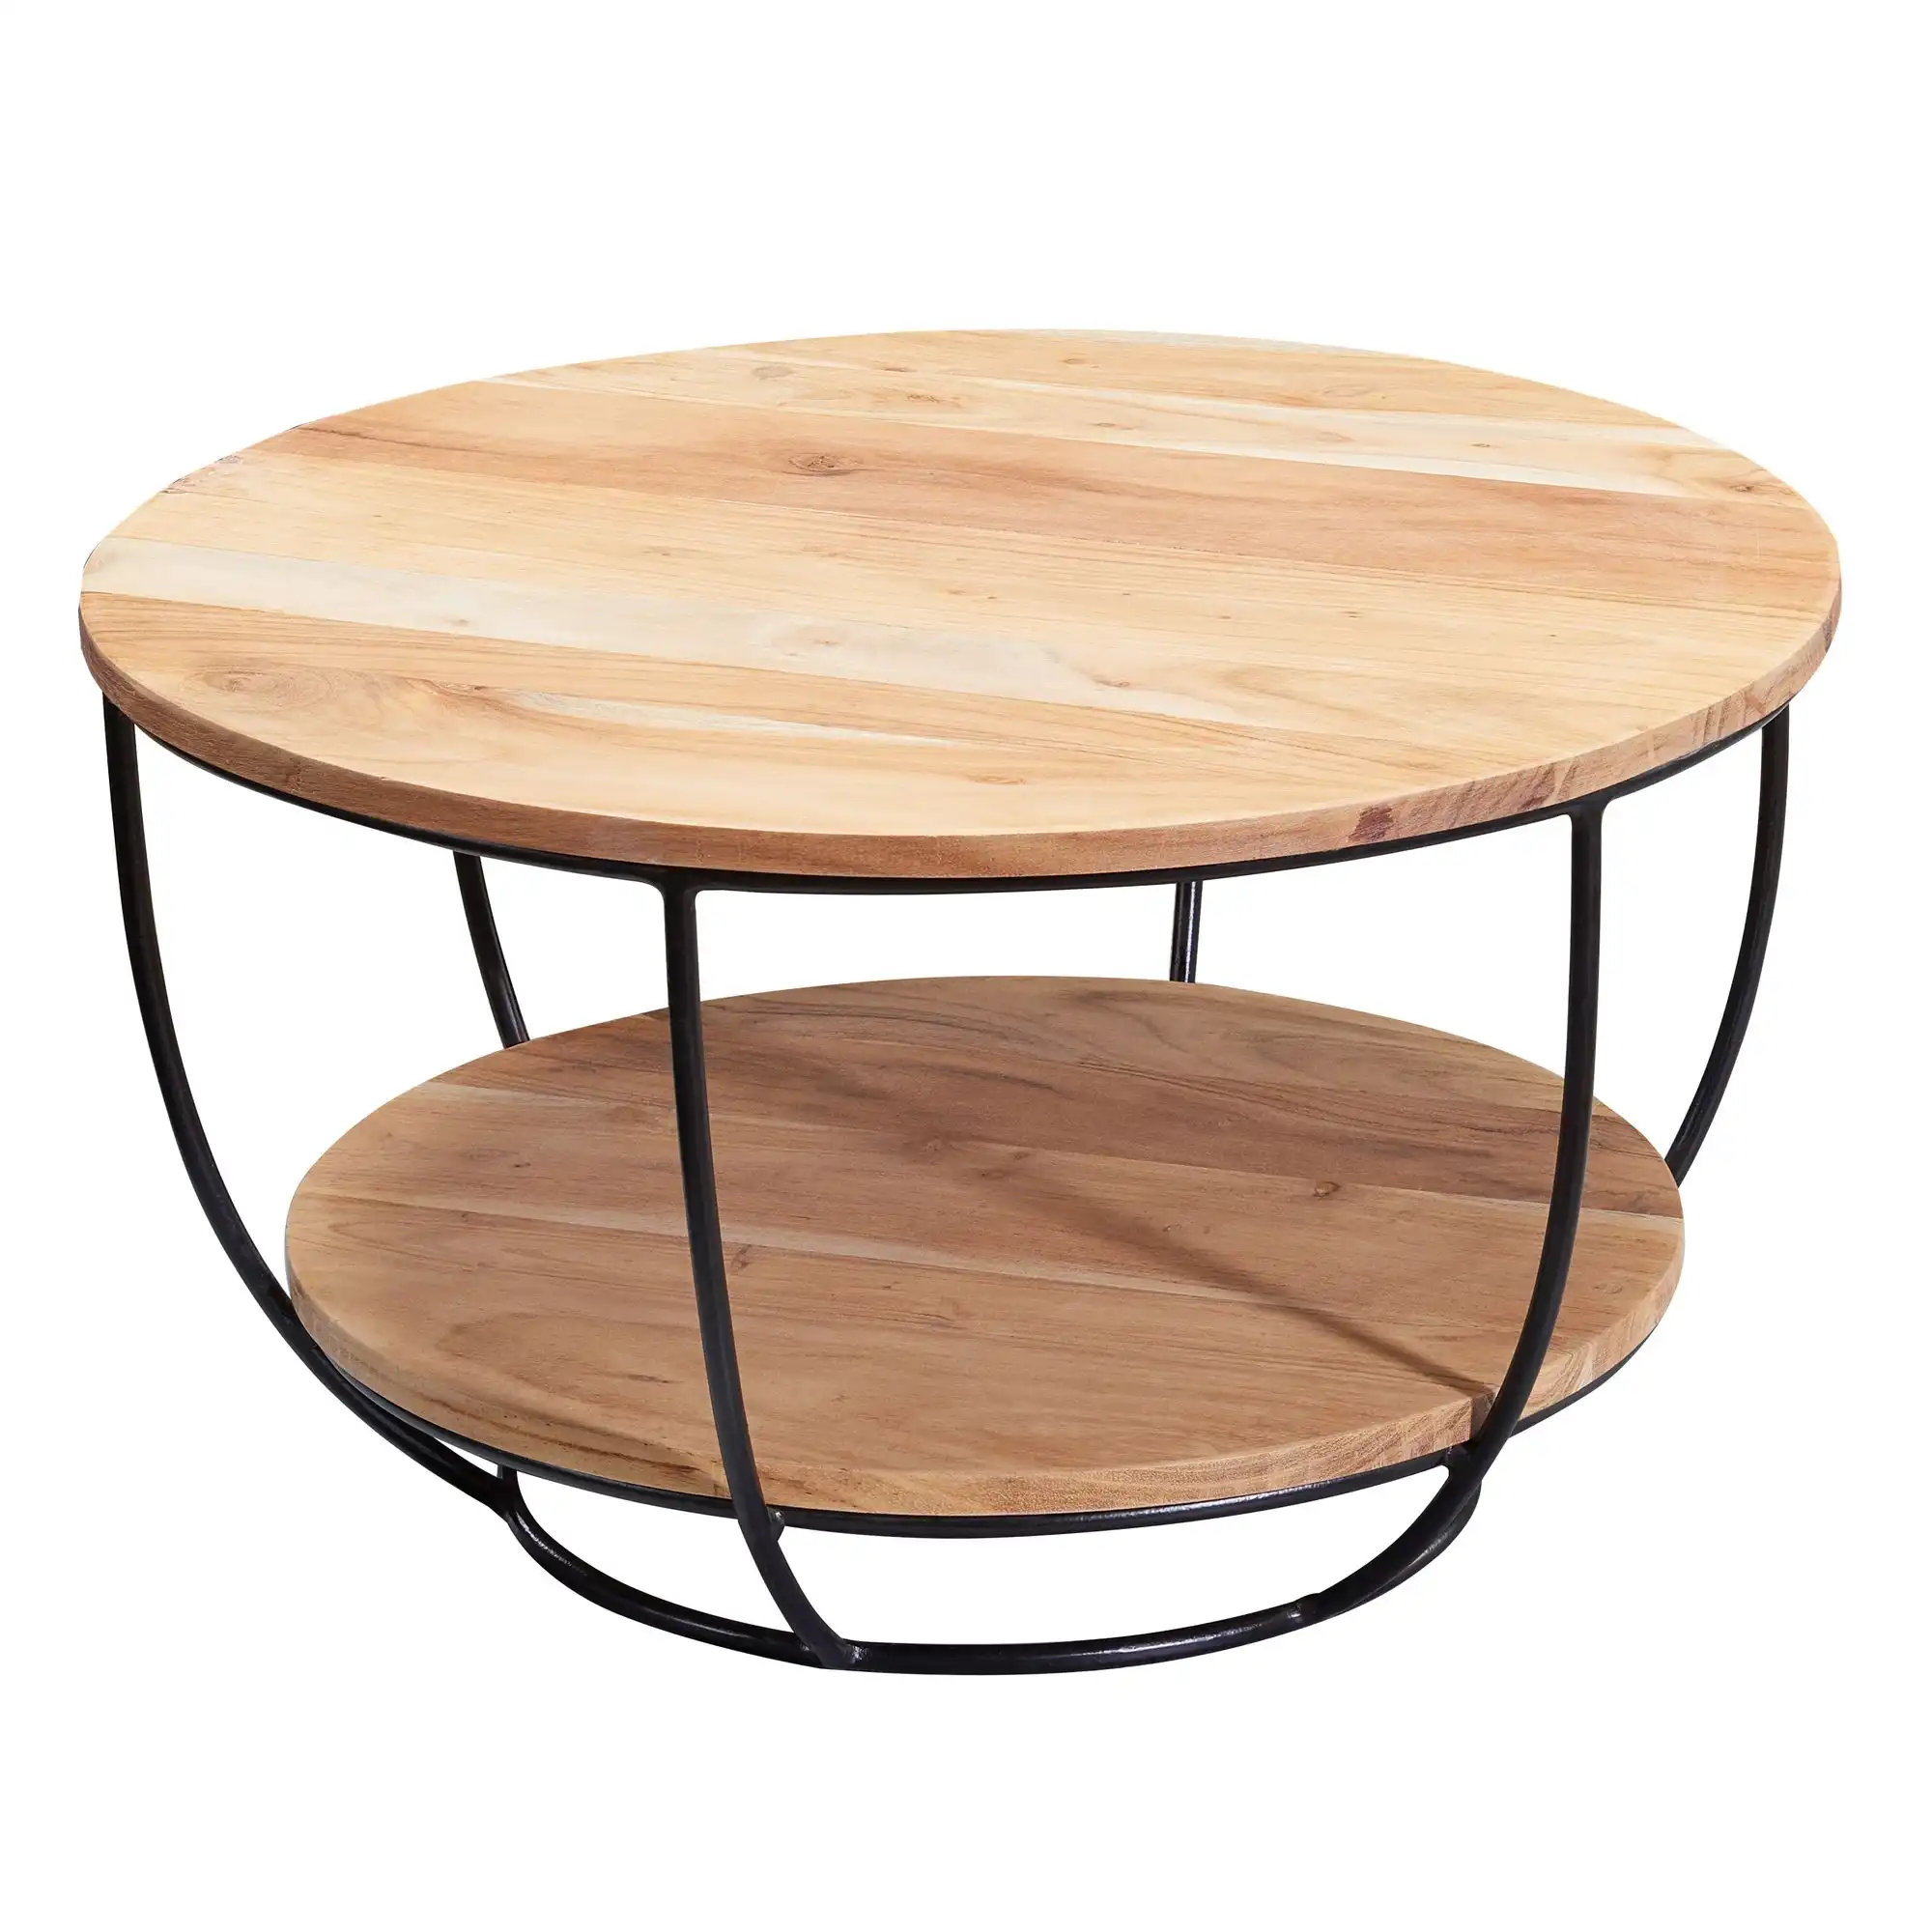 Wooden & Iron Round Coffee Table with 2 Shelves - popular handicrafts